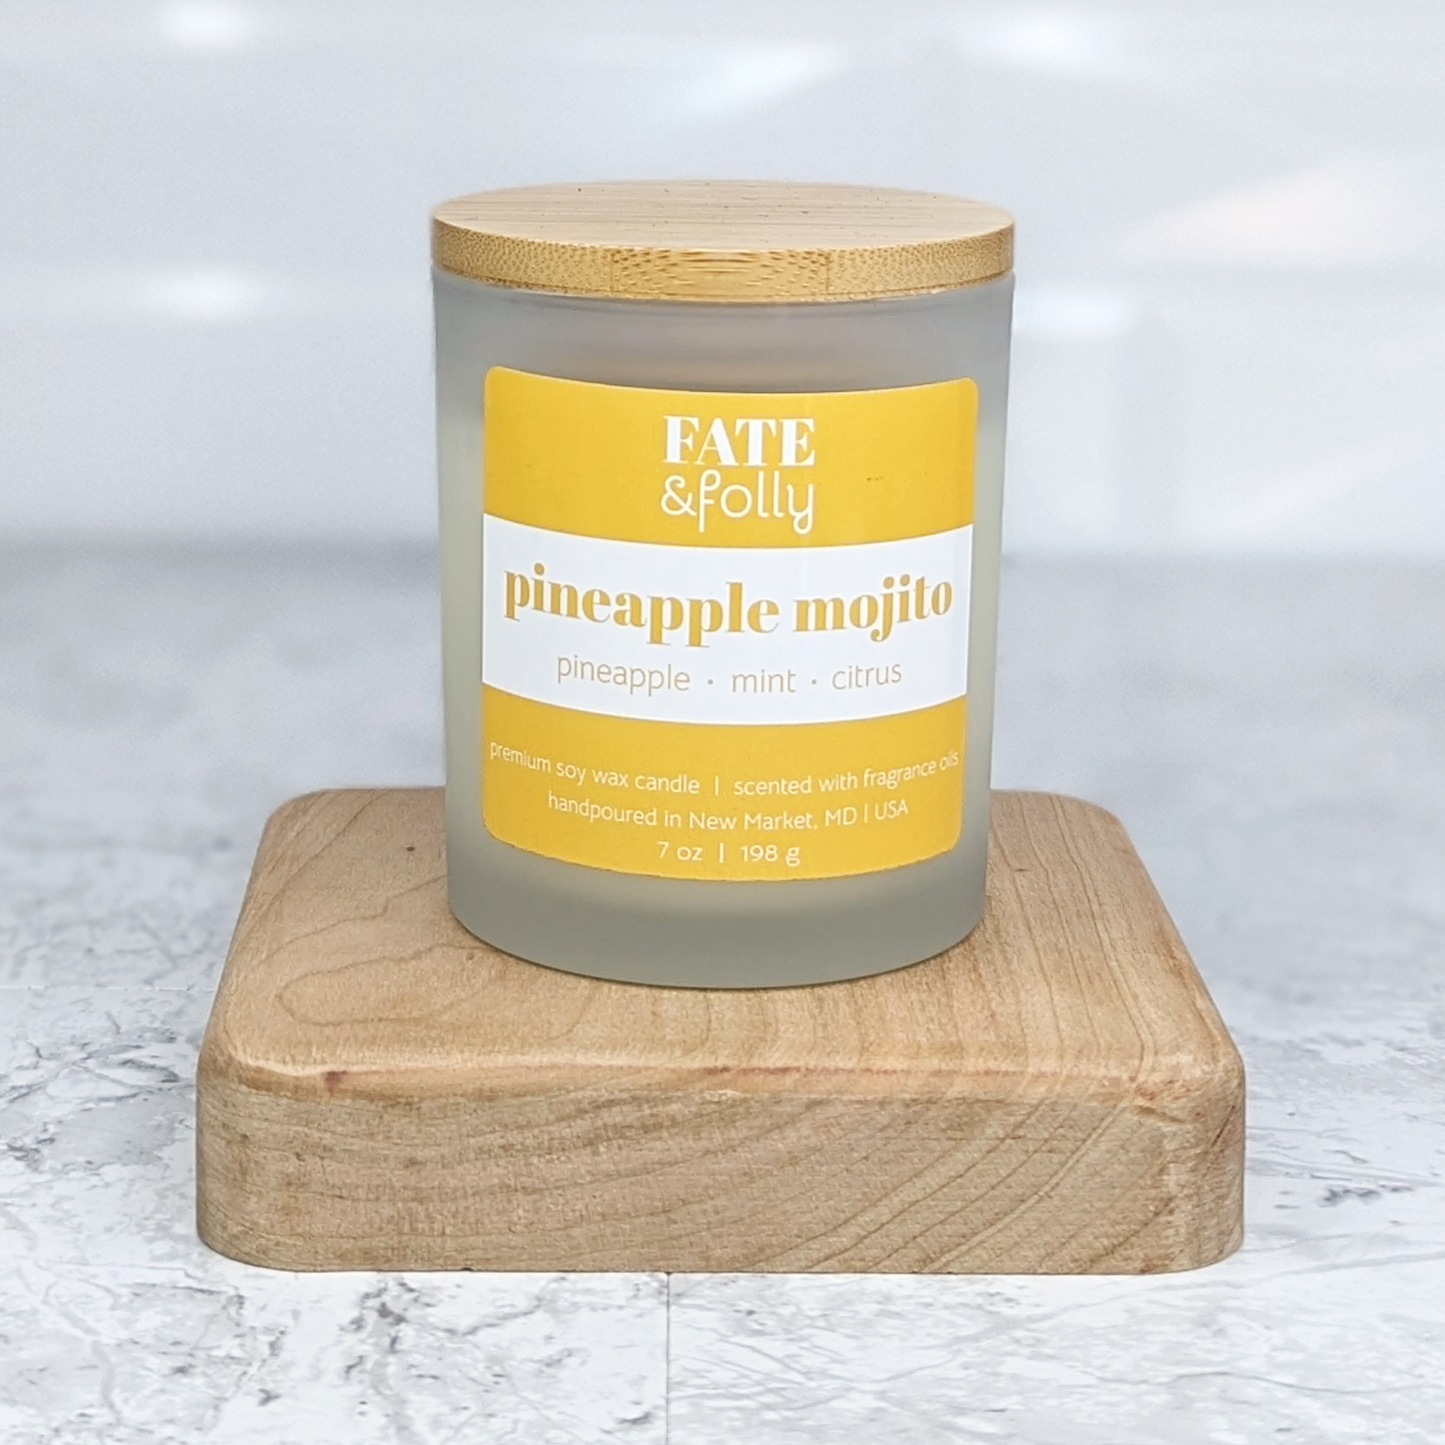 Premium Soy Wax Candle with Wood Wick - Pineapple Mojito